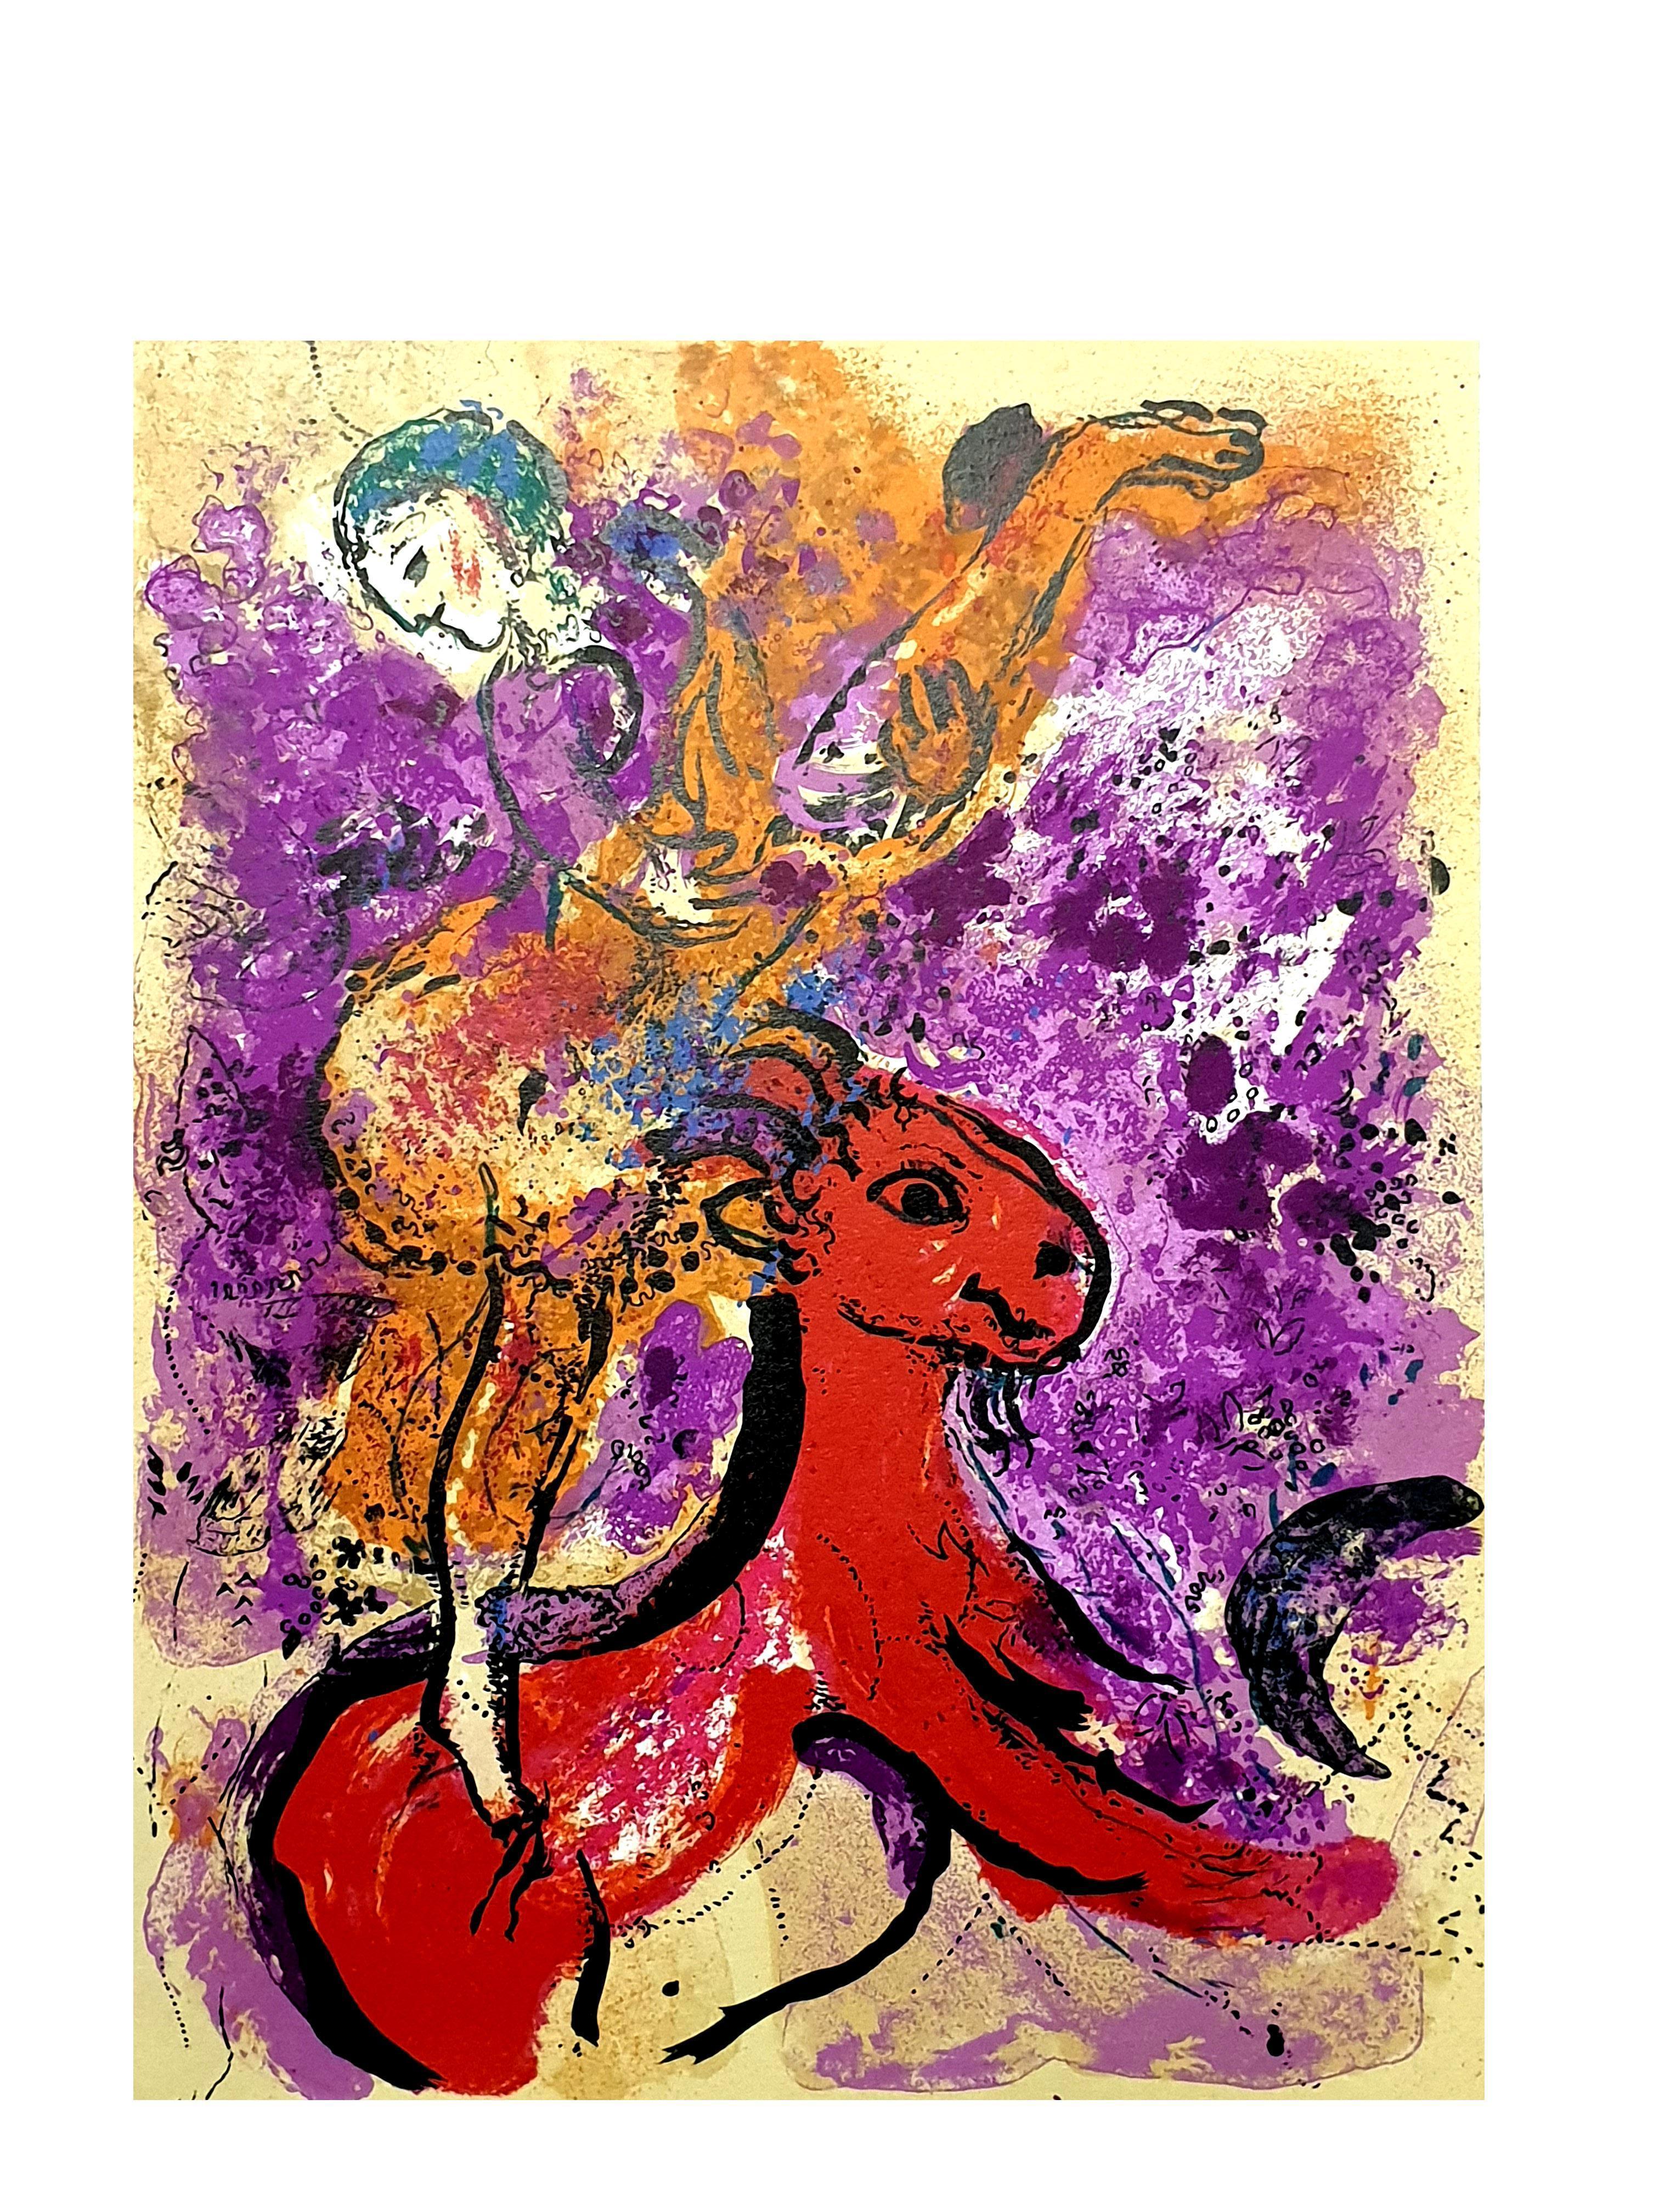 Marc Chagall - The Red Rider - Original Lithograph 1